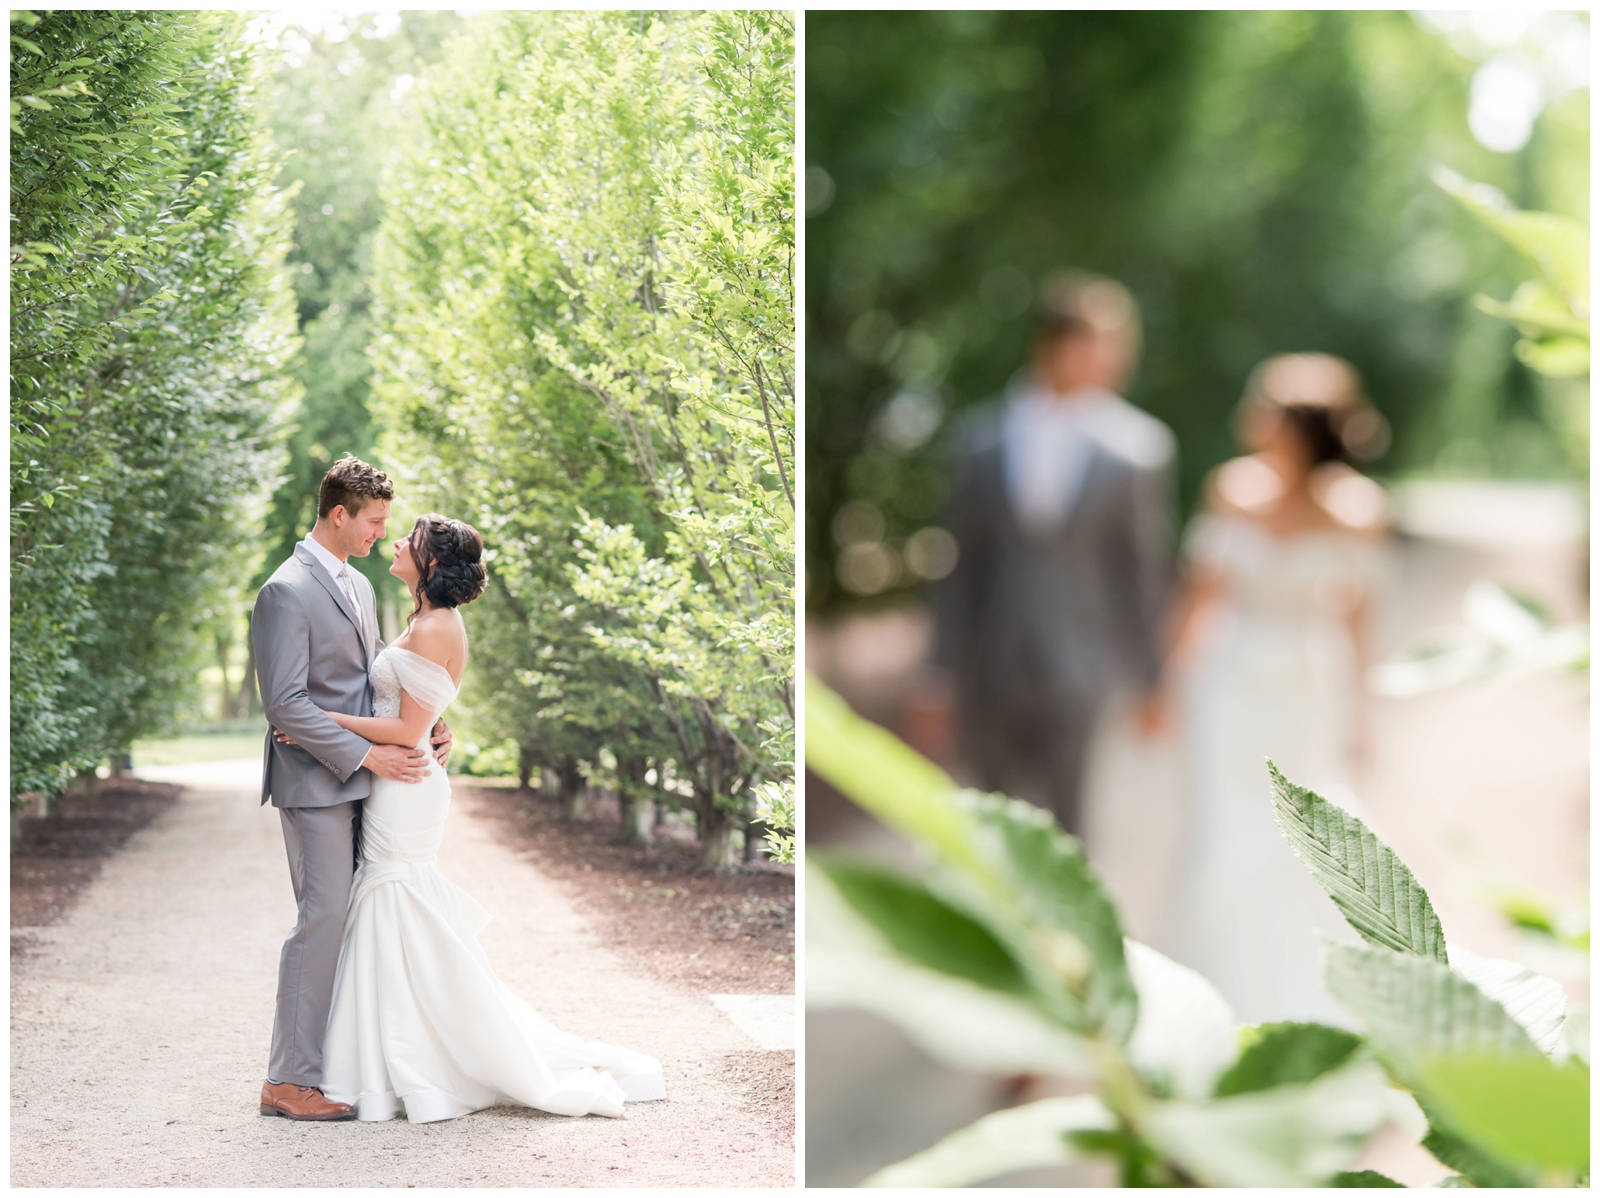 newlyweds embrace during portraits among trees at Franklin Park Conservatory